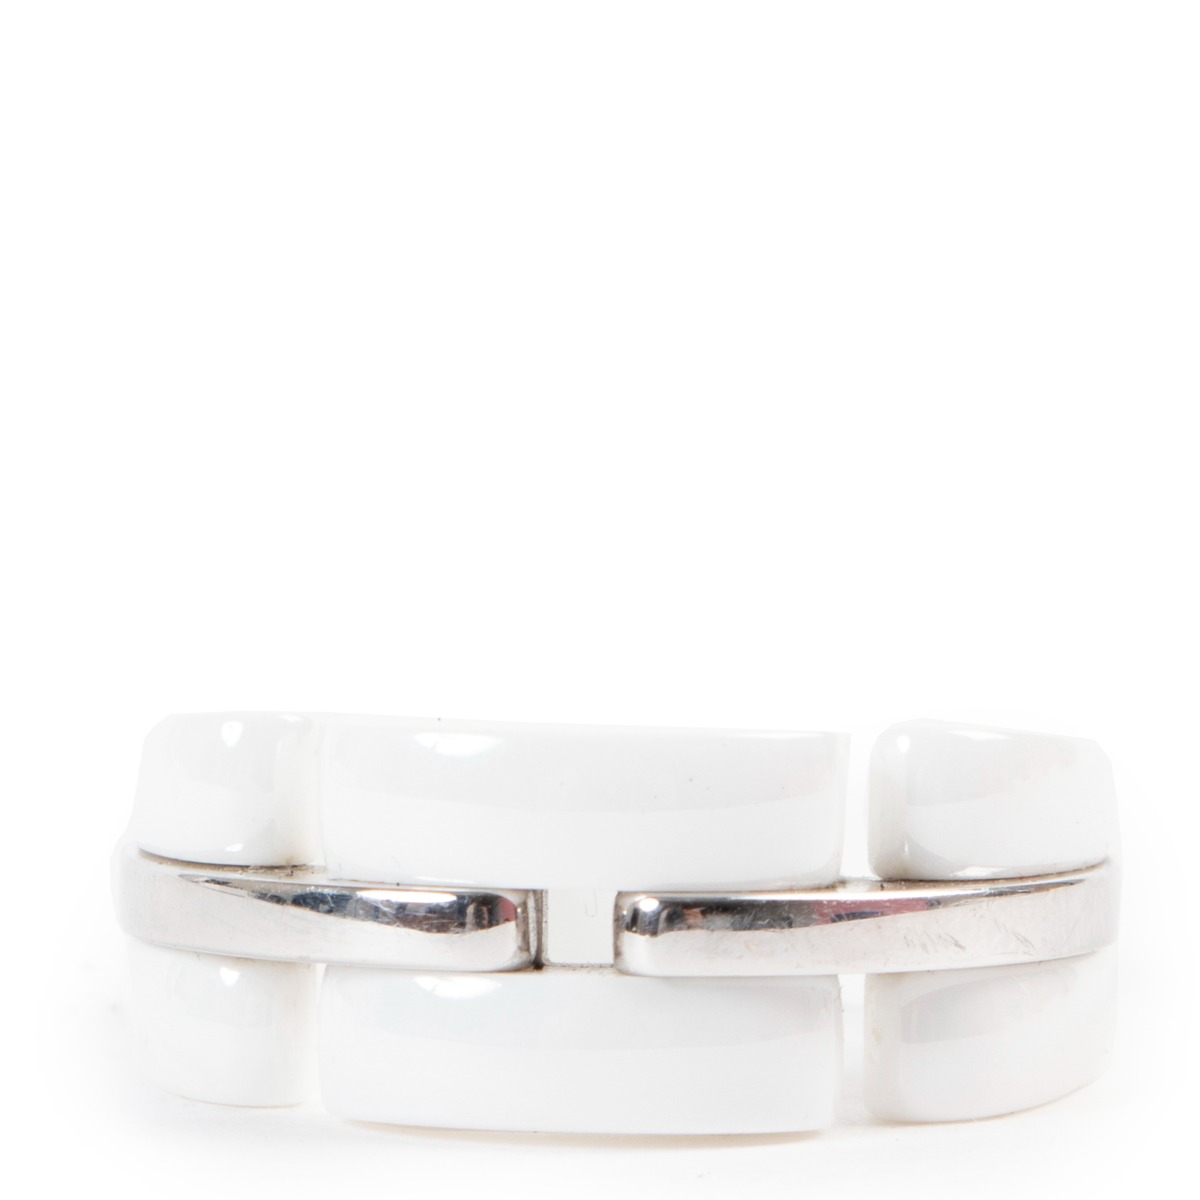 Chanel Ultra Ring - 12 For Sale on 1stDibs  chanel ultra ring white, chanel  white ceramic ring, chanel ultra ring black